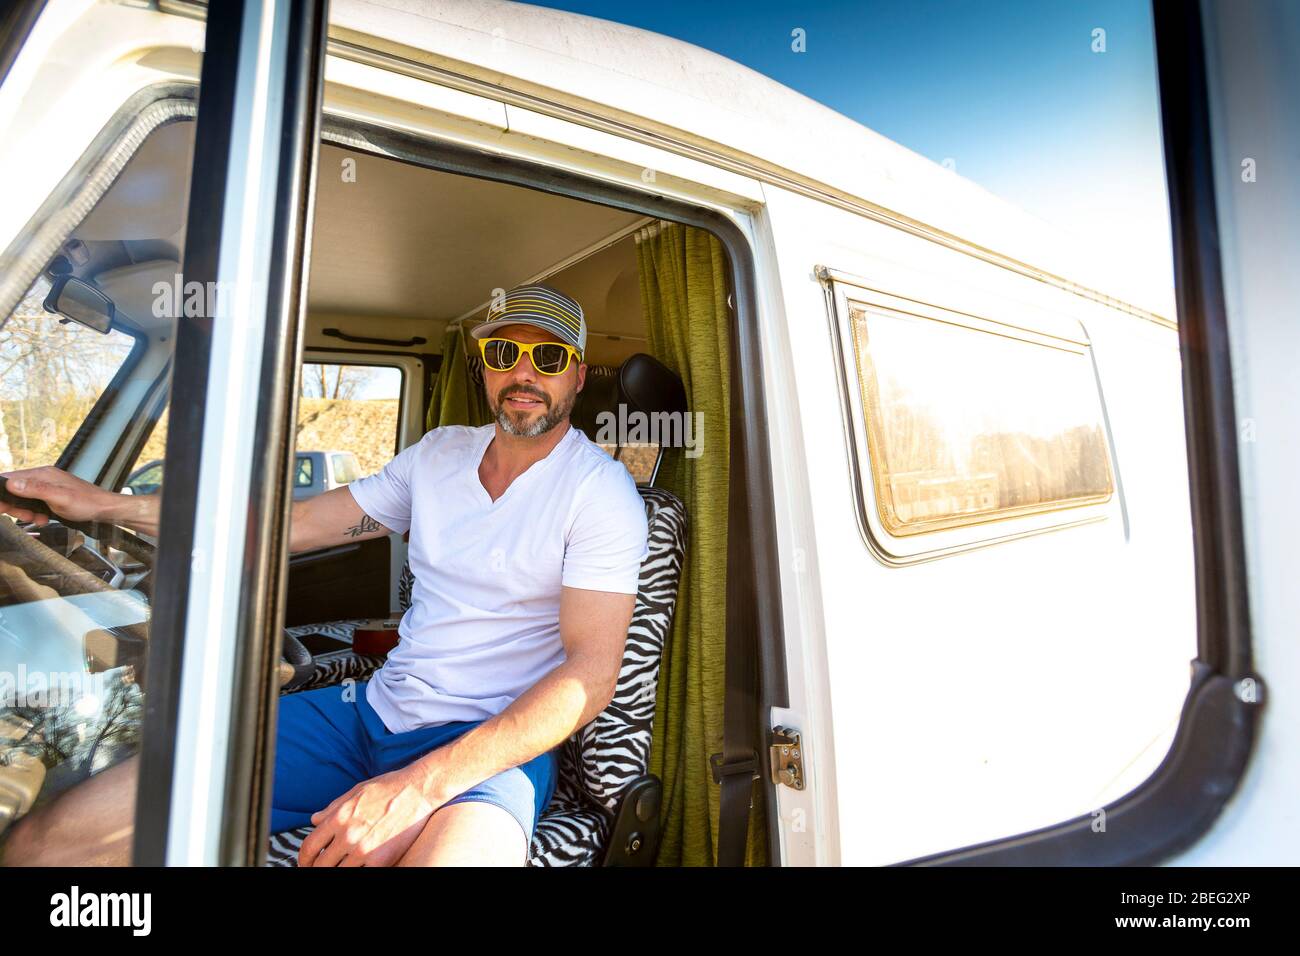 Portrait of man with sunglasses during vacations in his van Stock Photo